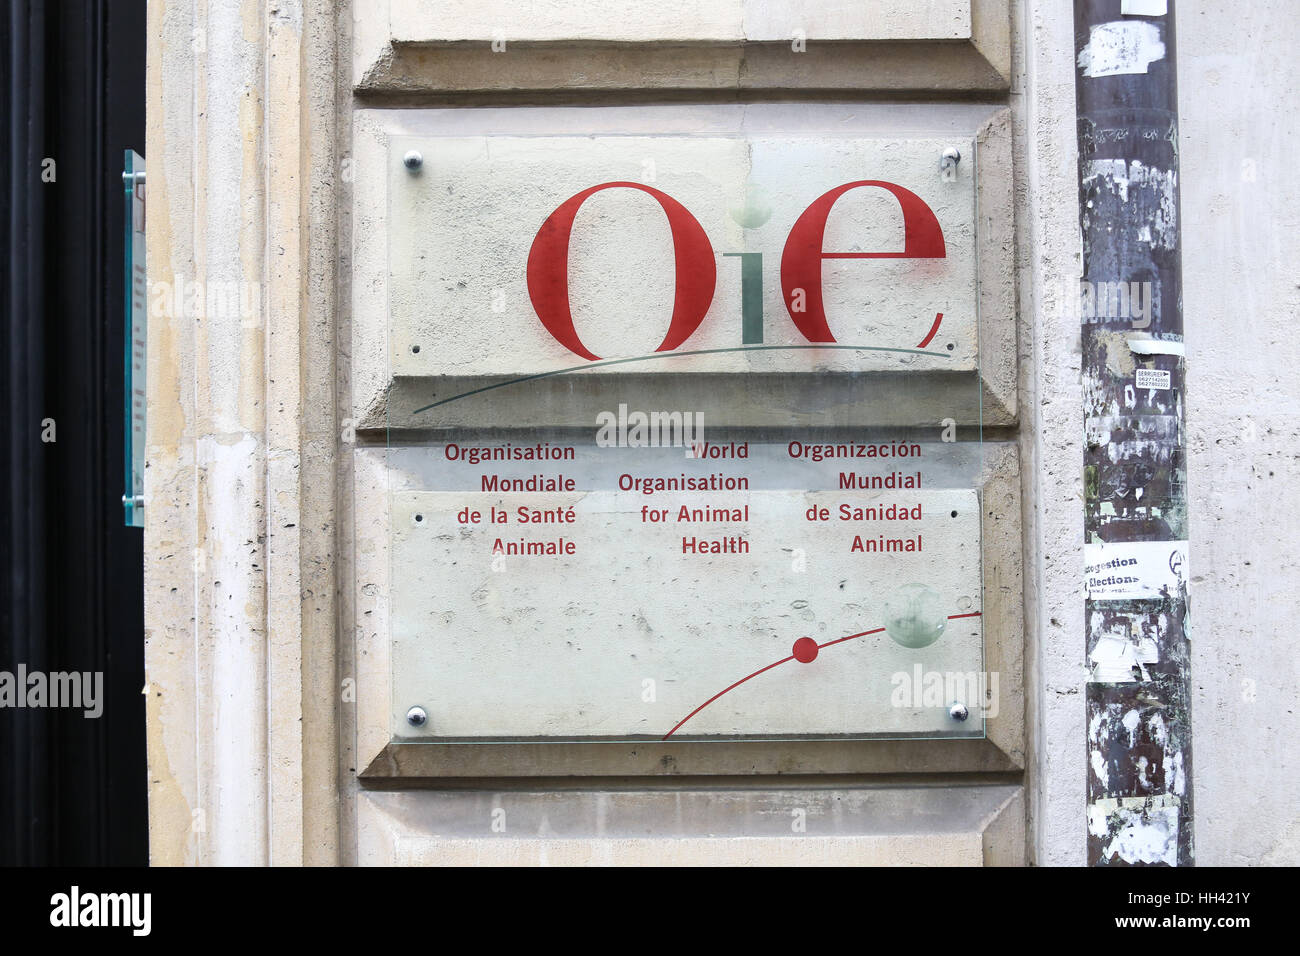 The OIE (World Organisation for Animal Health) headquarters in Paris, France. Stock Photo